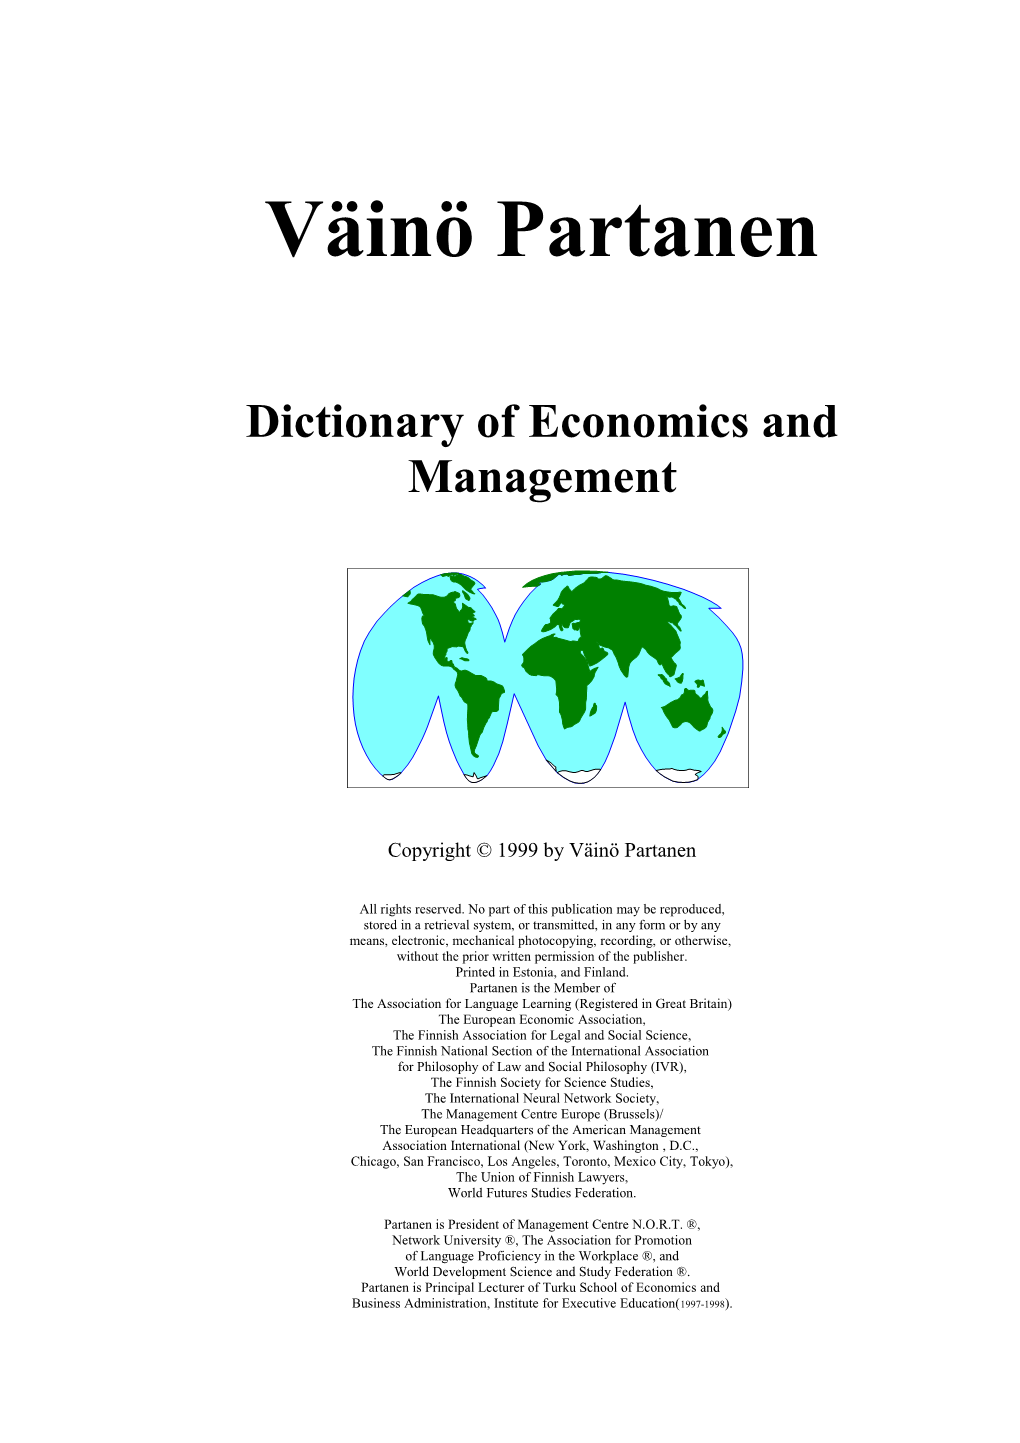 Dictionary of Economics And